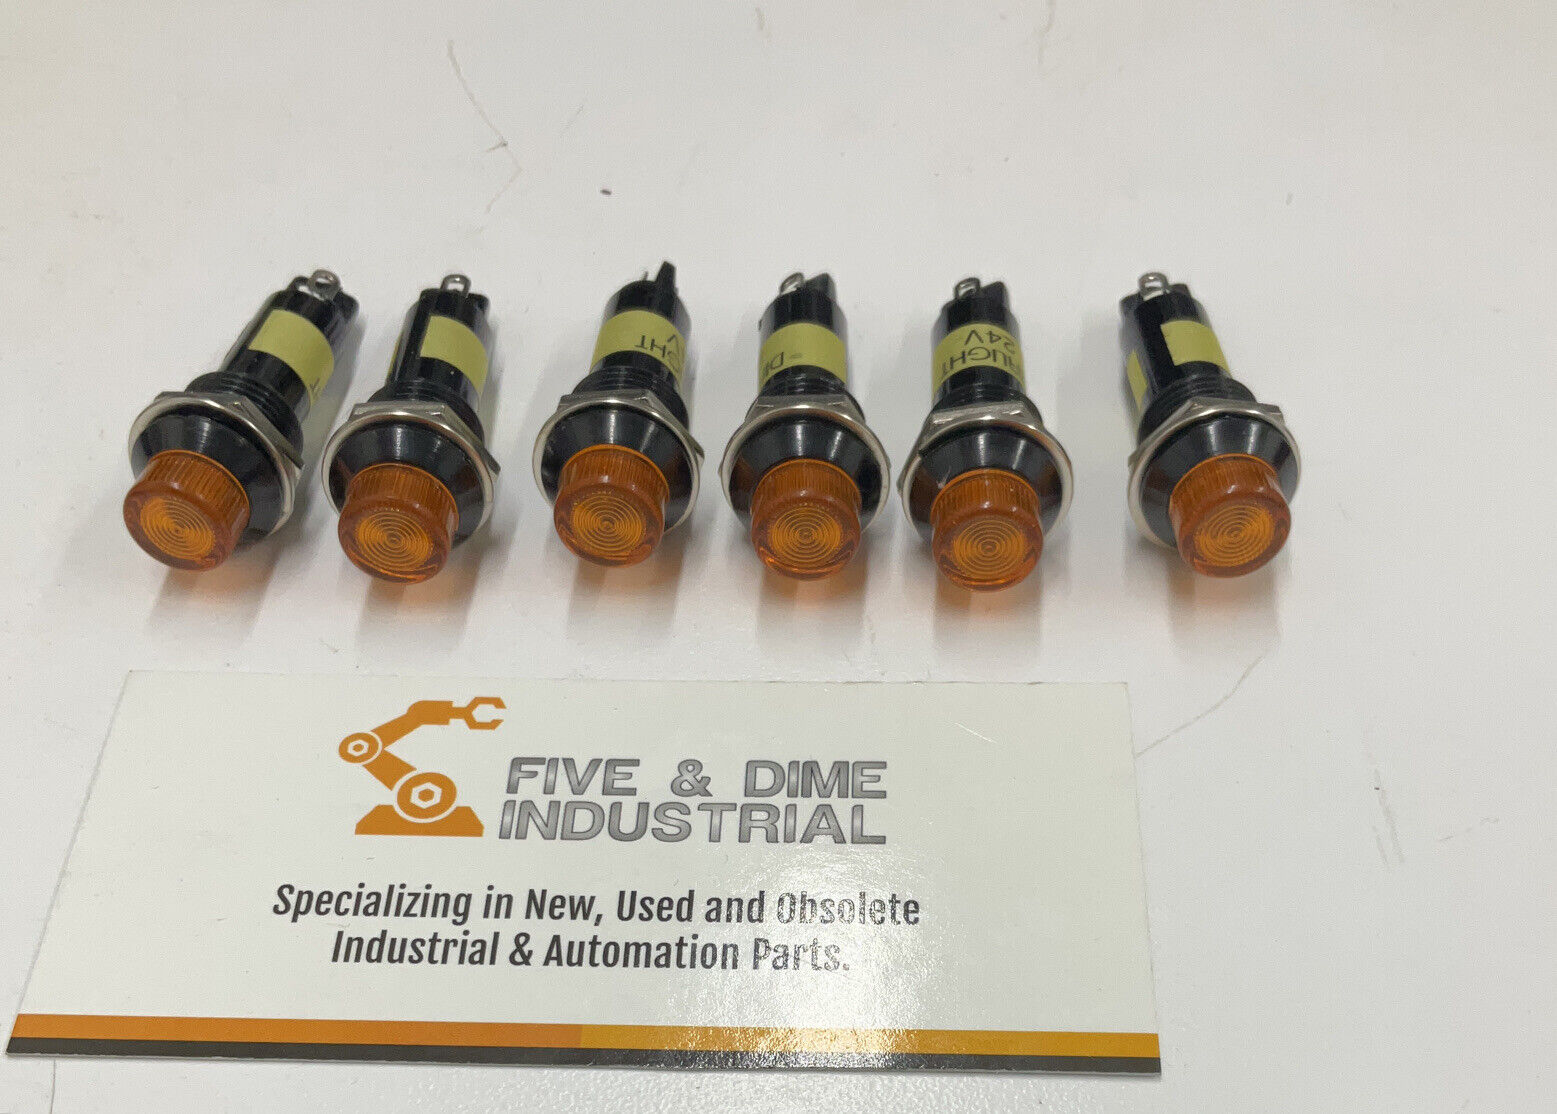 Dialight  Lot of 6 New Led 24VDC Panel Indicator 350-2107-ND  Amber  (RE114) - 0